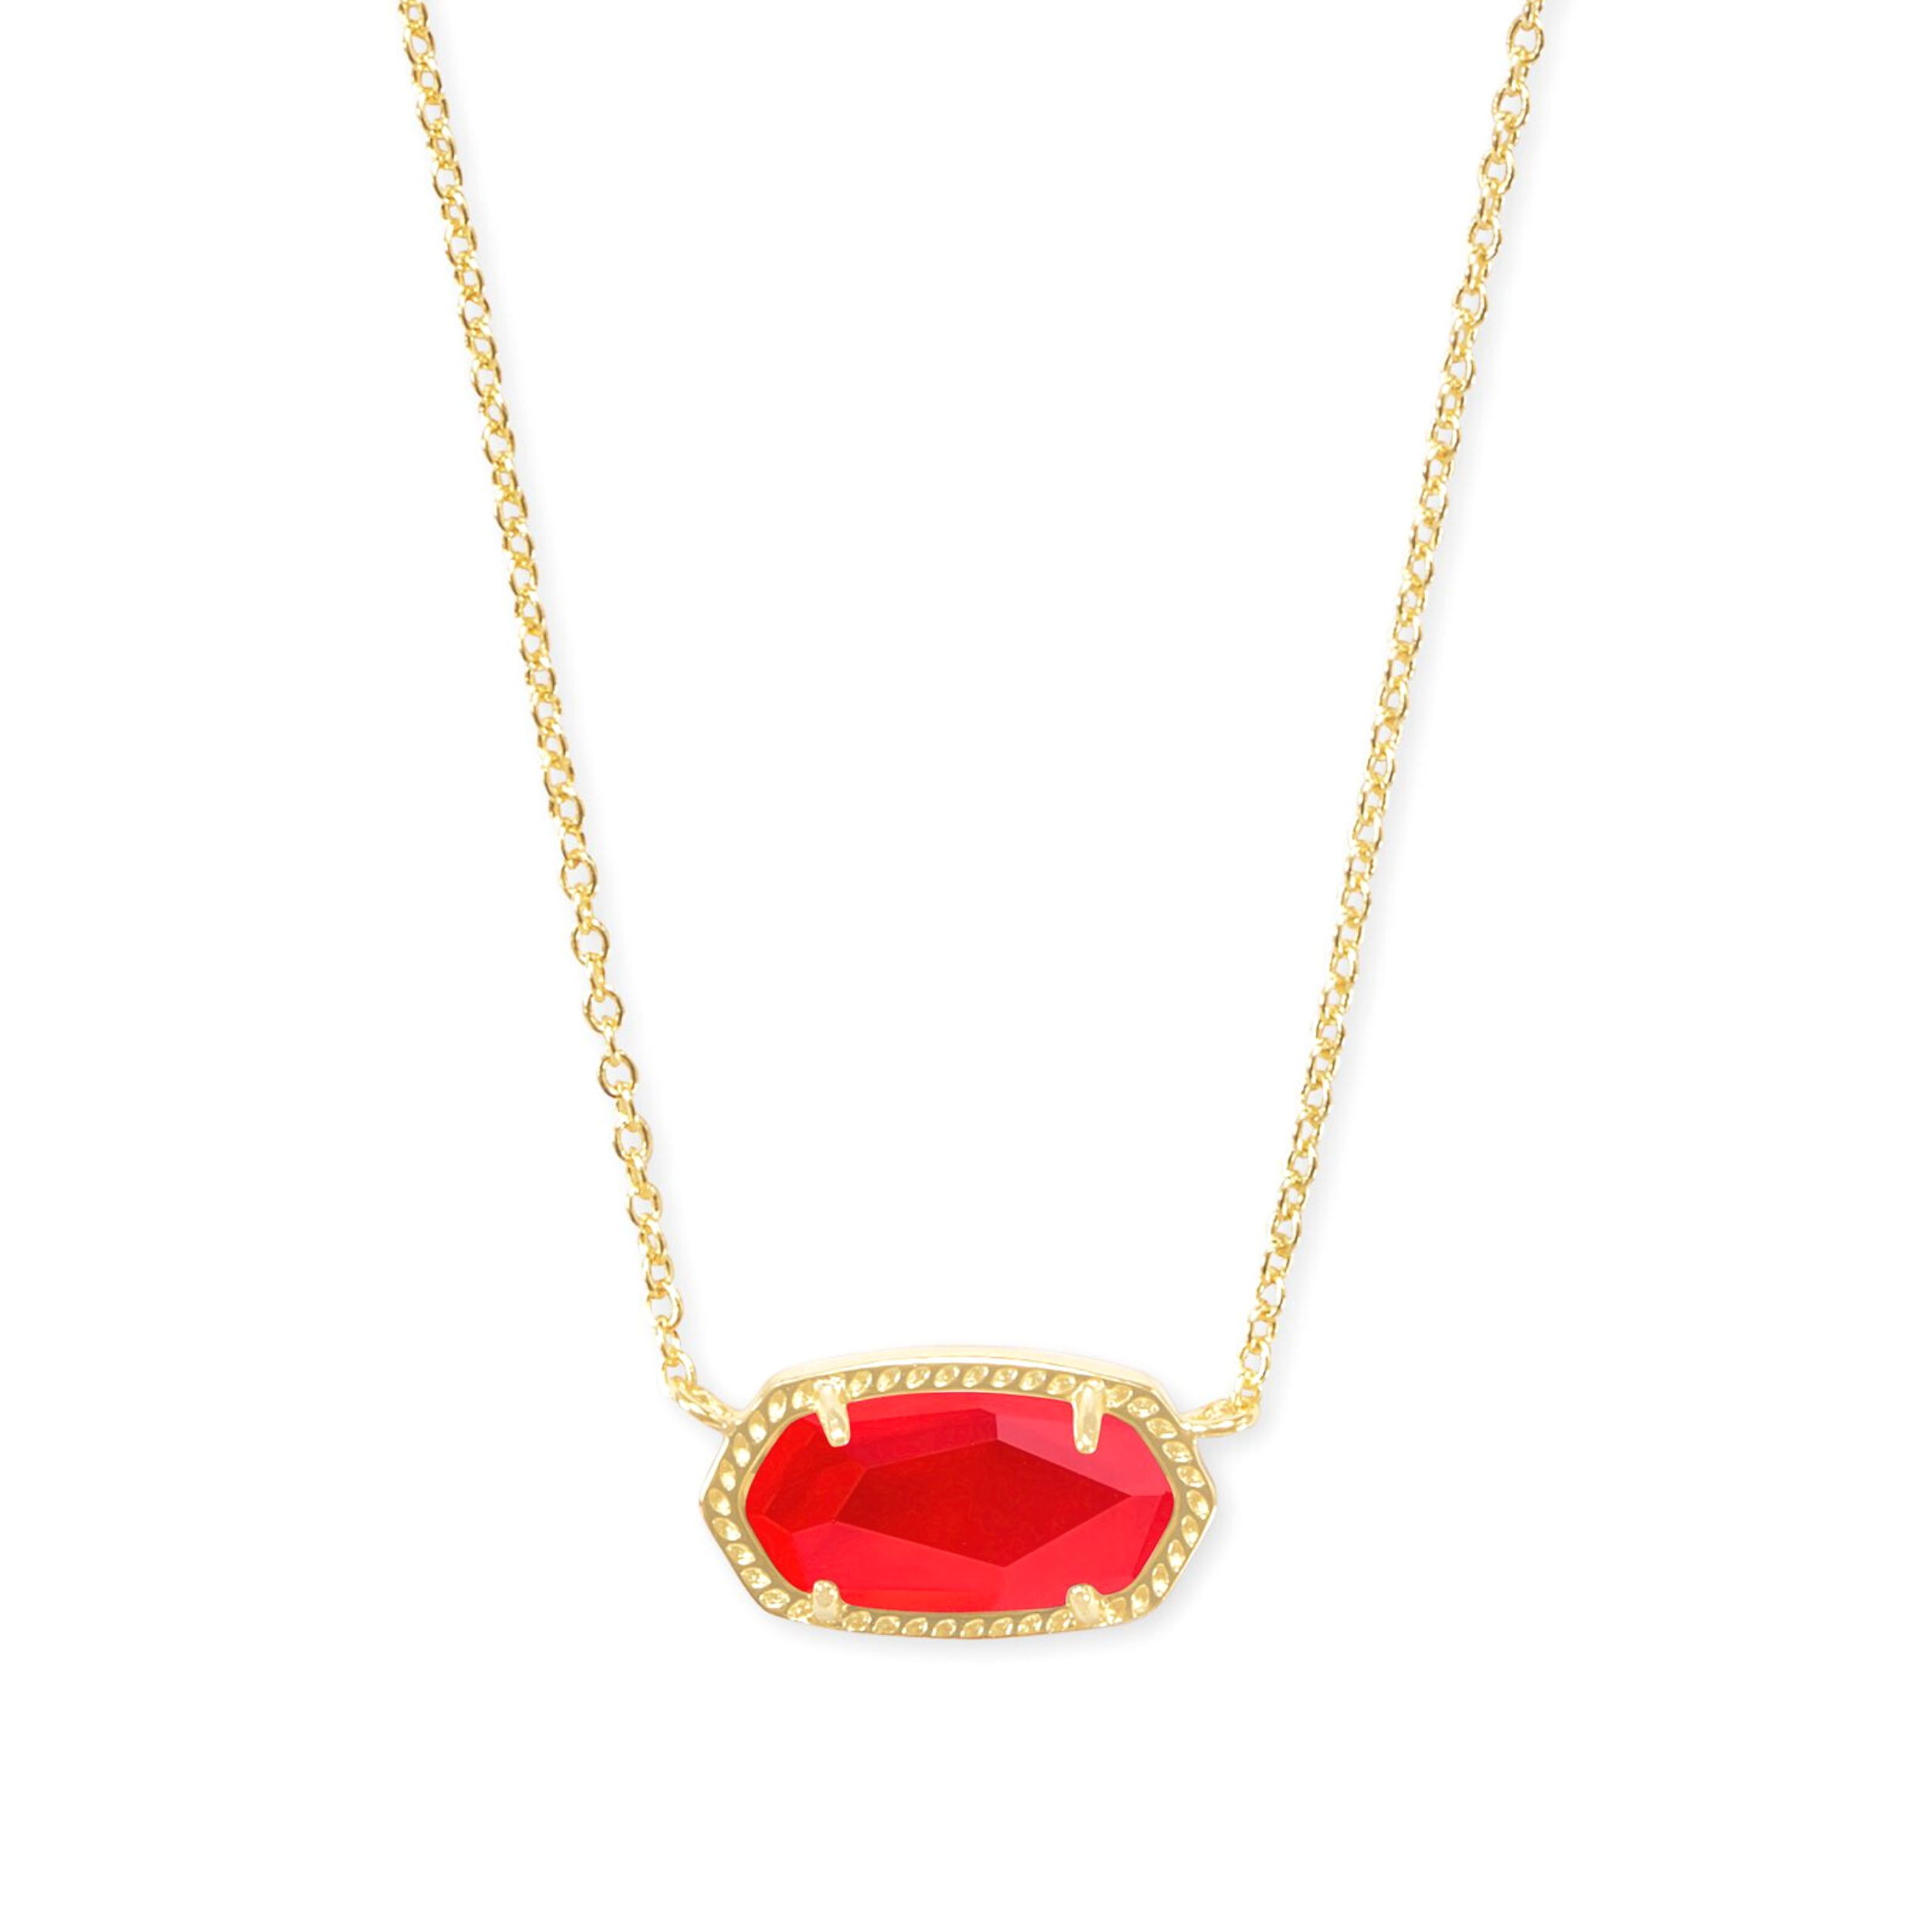 Kendra Scott | Elisa Gold Pendant Necklace in Red Illusion - Giddy Up Glamour Boutique